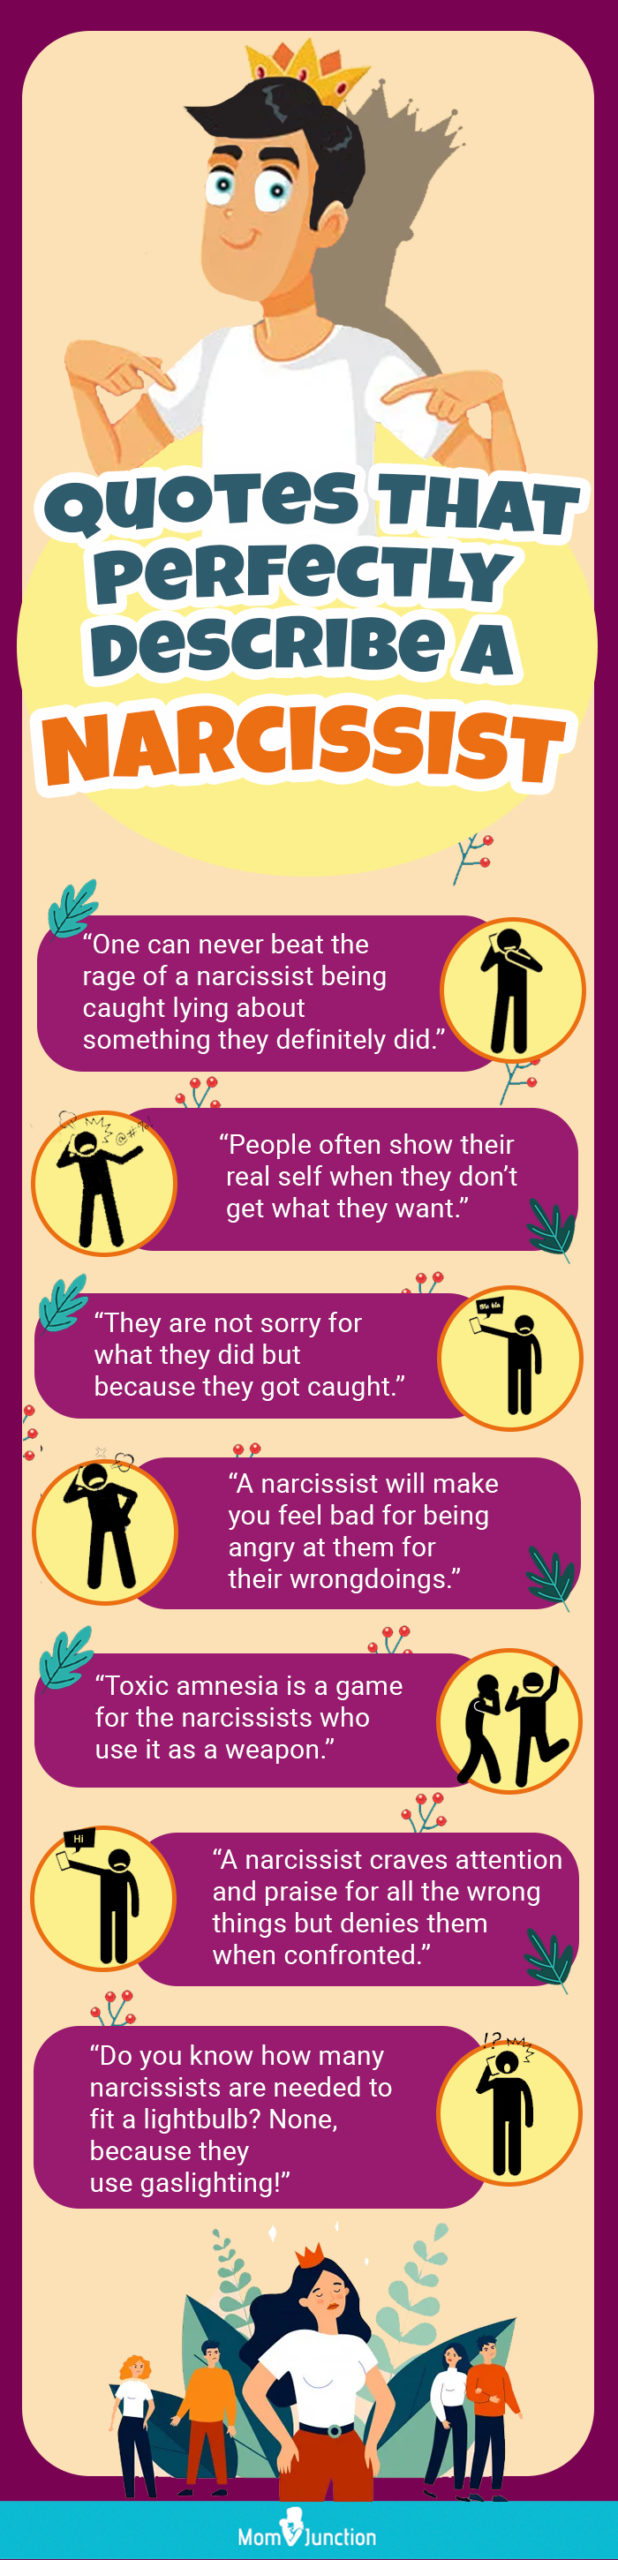 quotes that perfectly describe a narcissist (infographic)